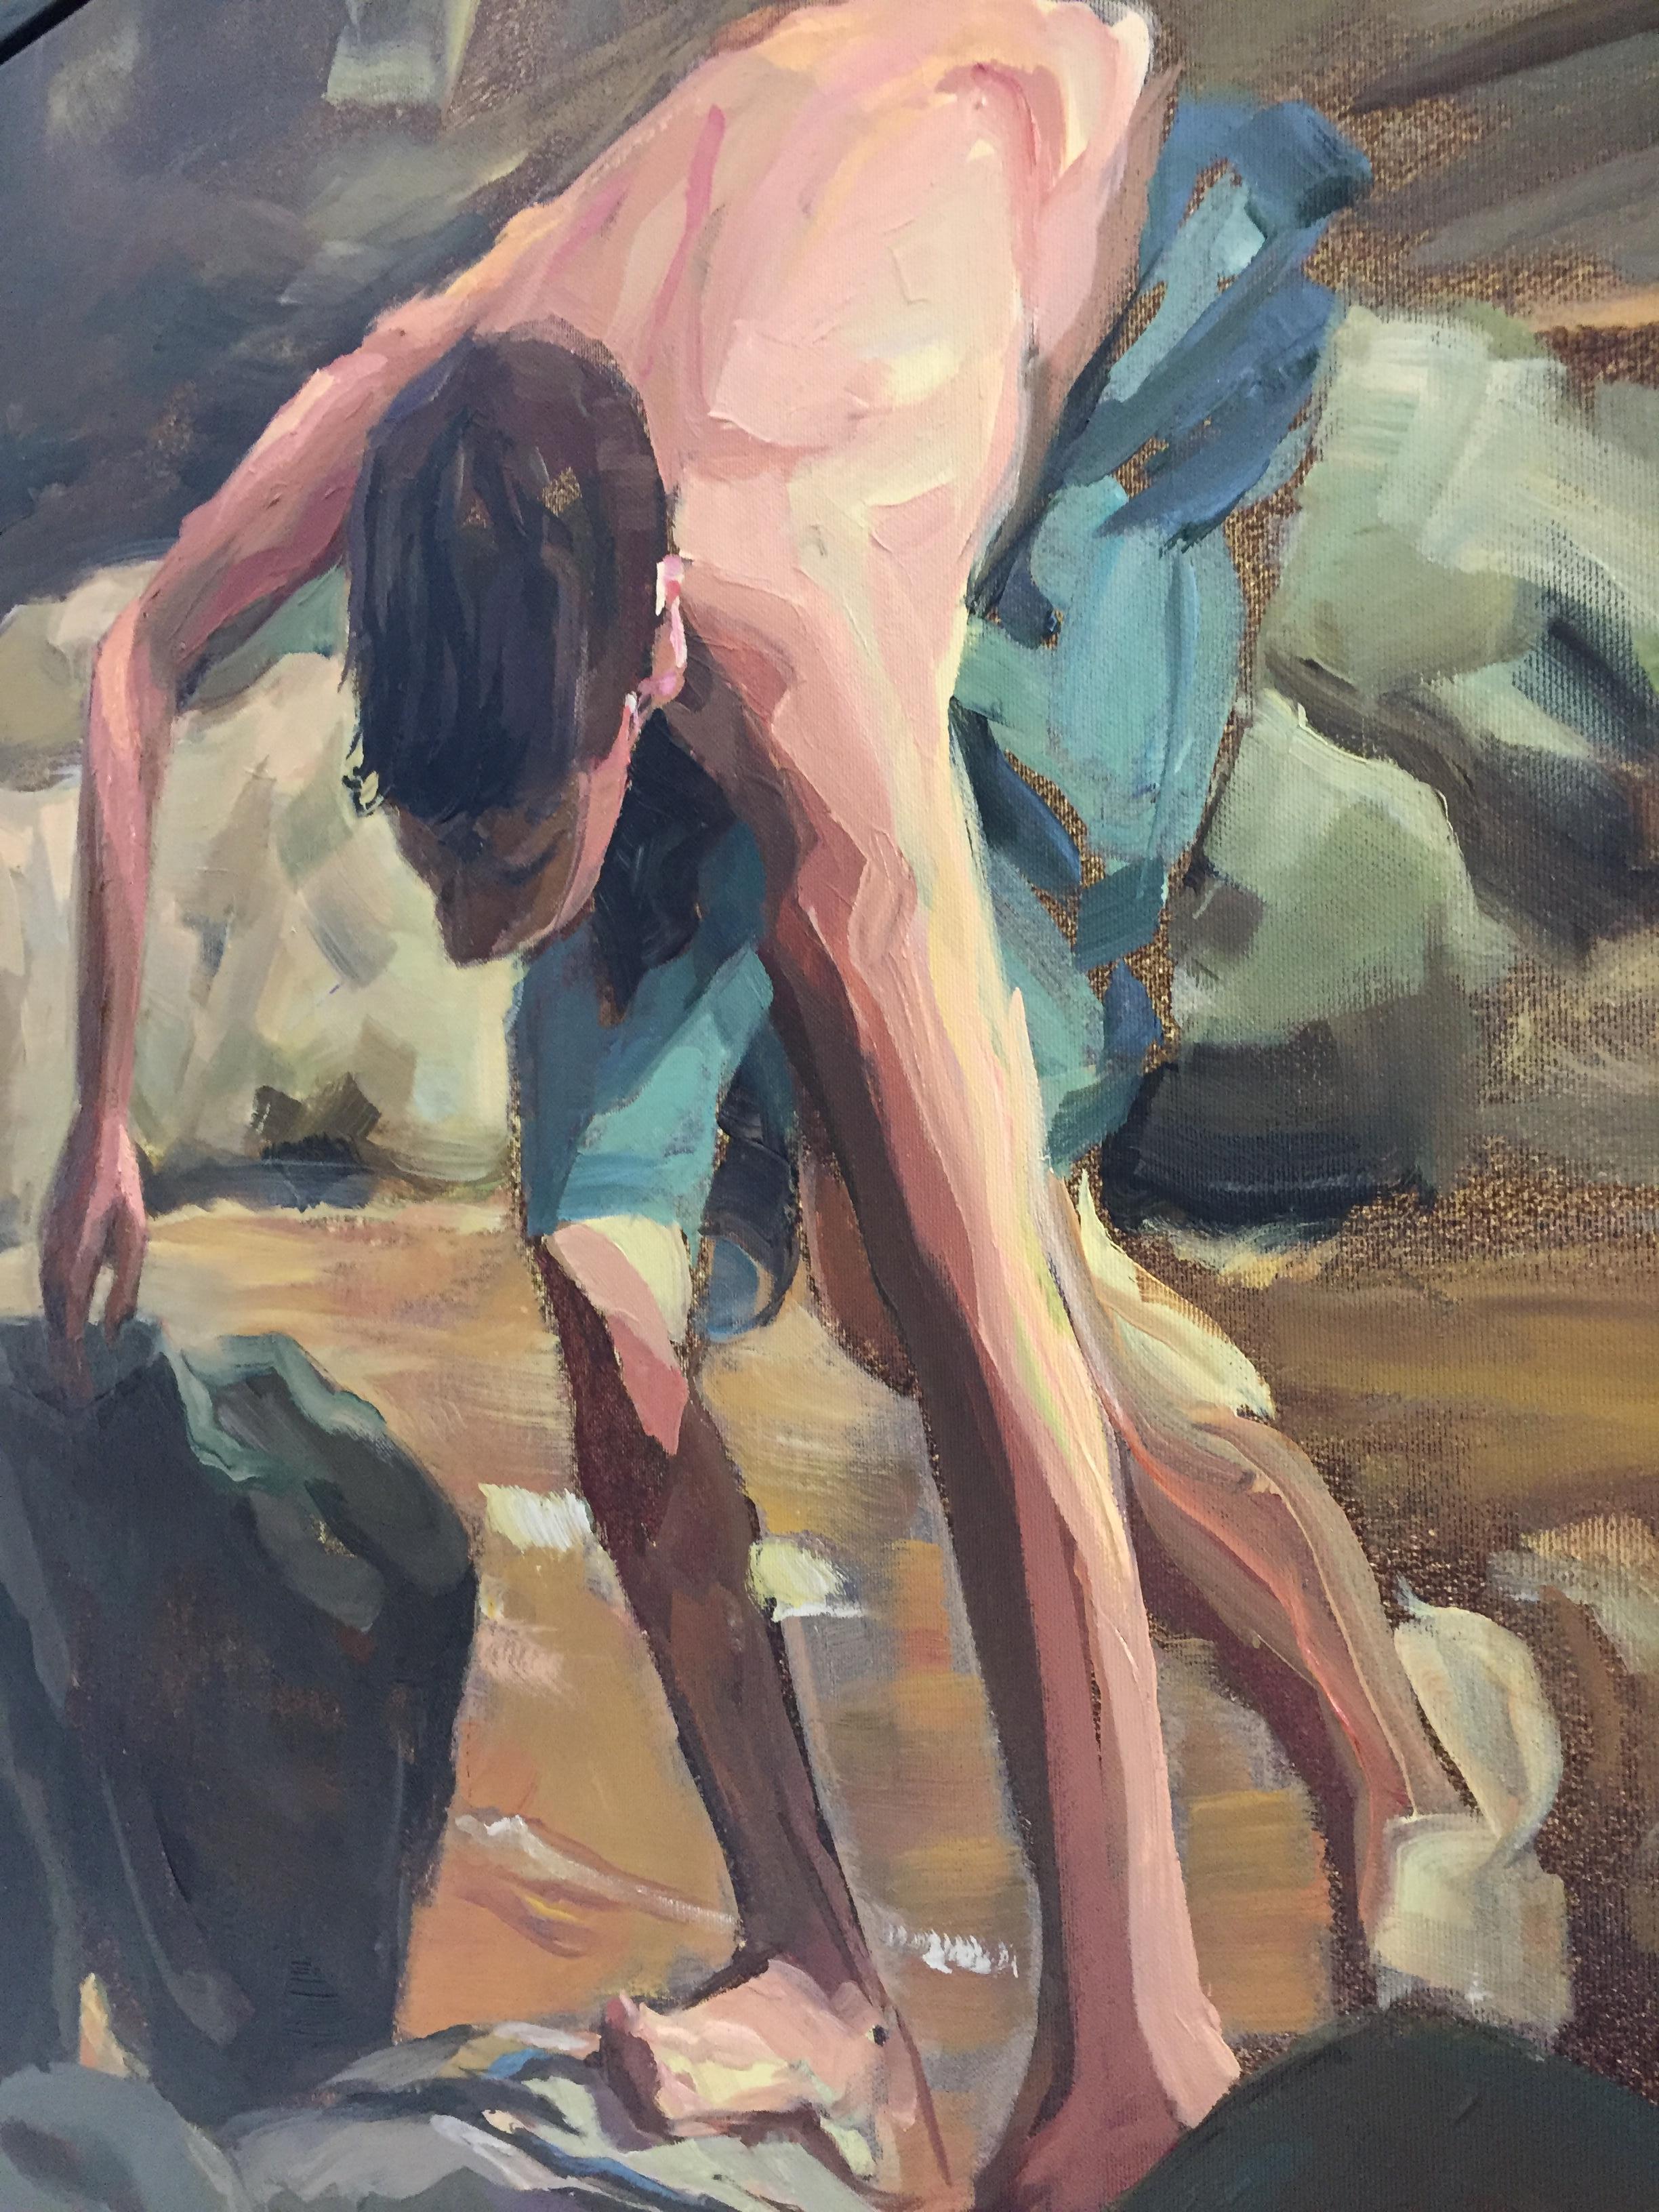 Boy climbing on rocks- 21st Century Contemporary Painting by Dutch Mitzy Renooy 2